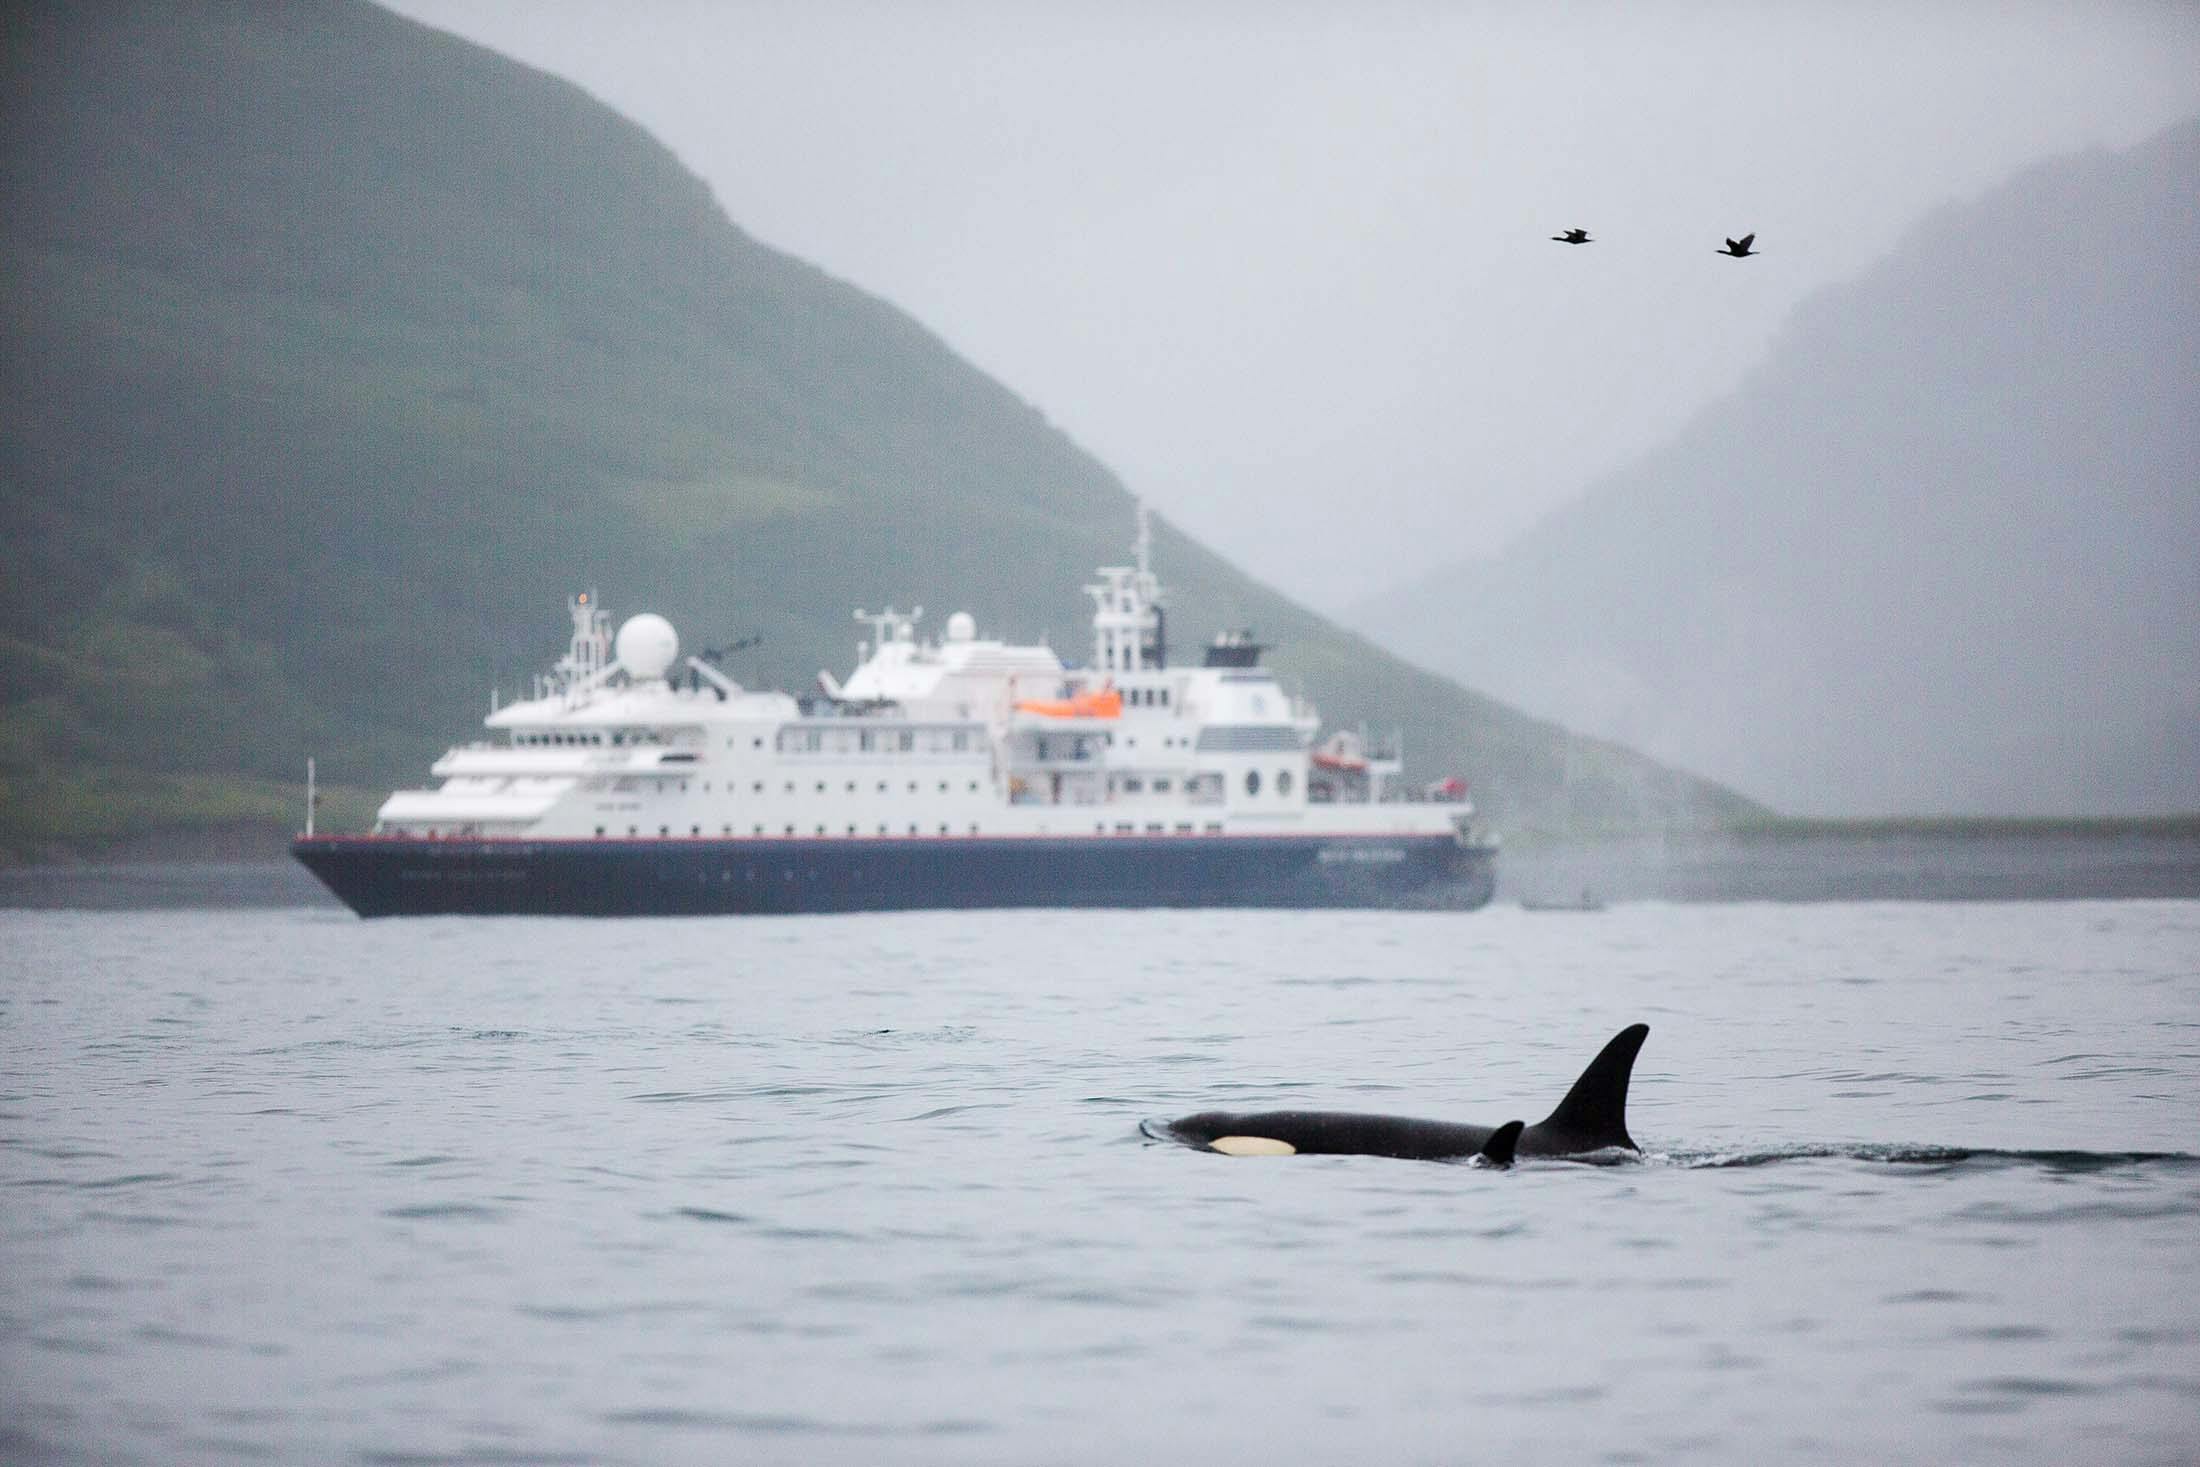 orcas in the wild - russian far east